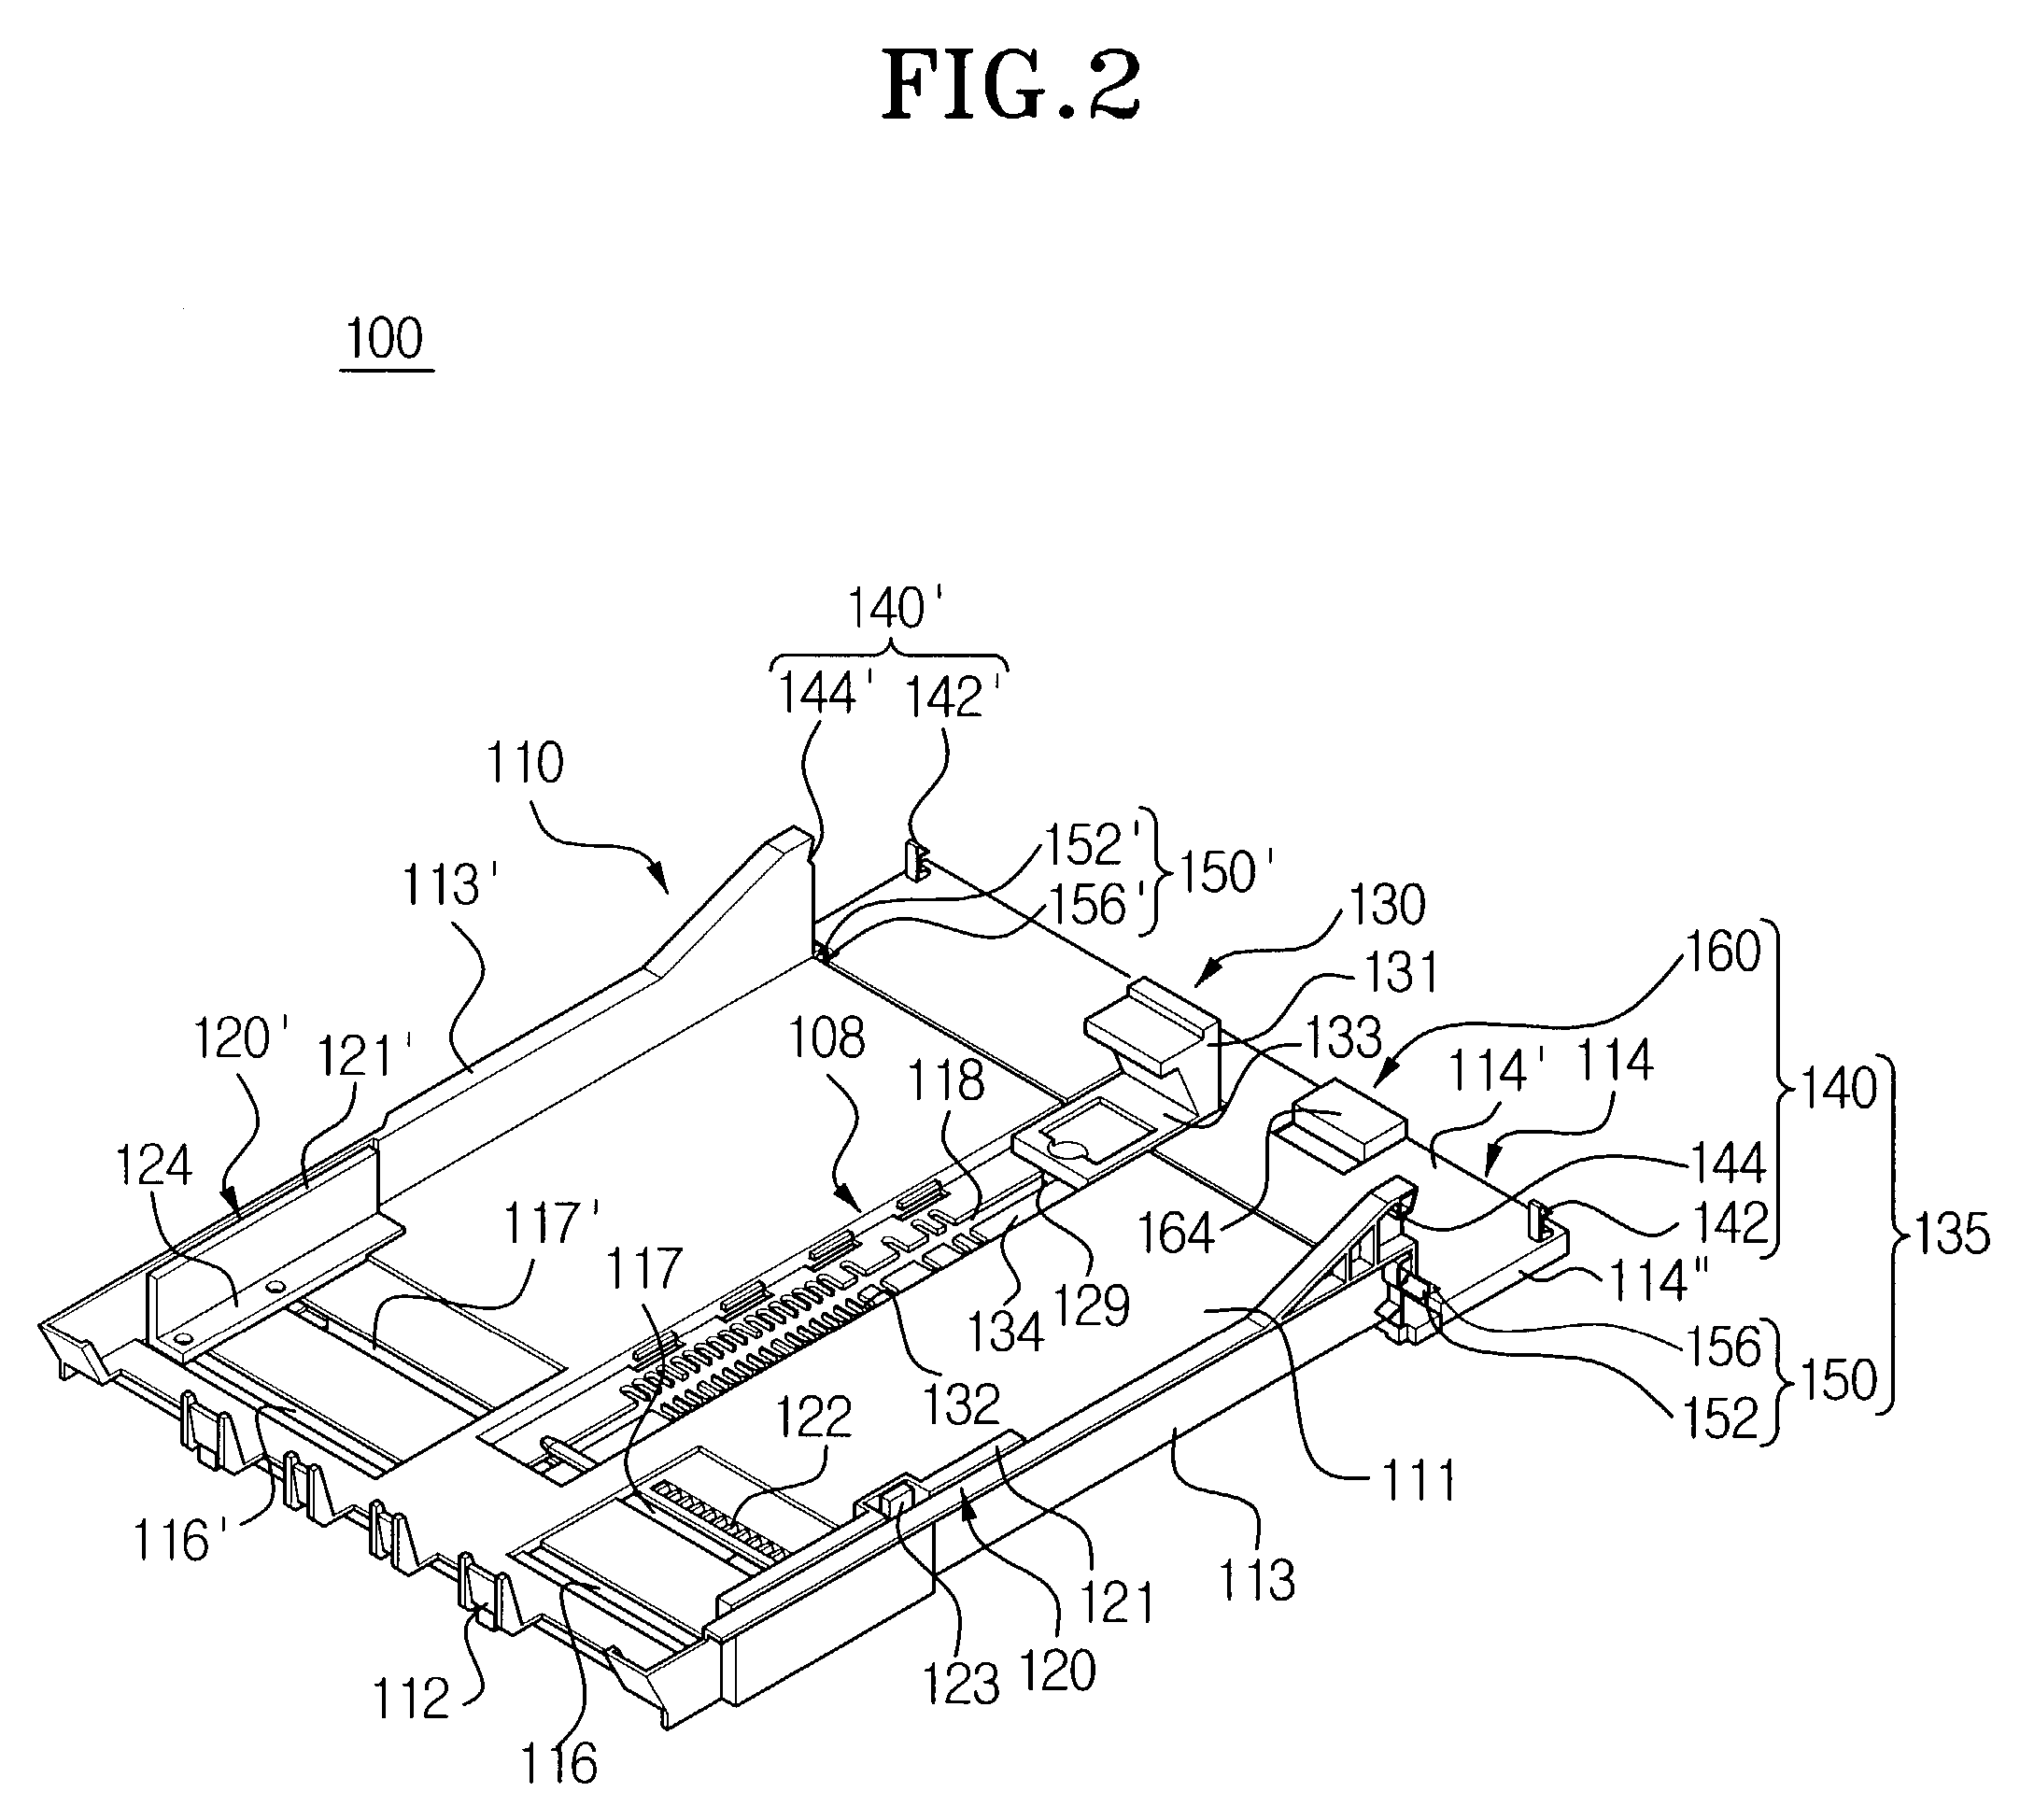 Paper feeding cassette to load paper of various sizes